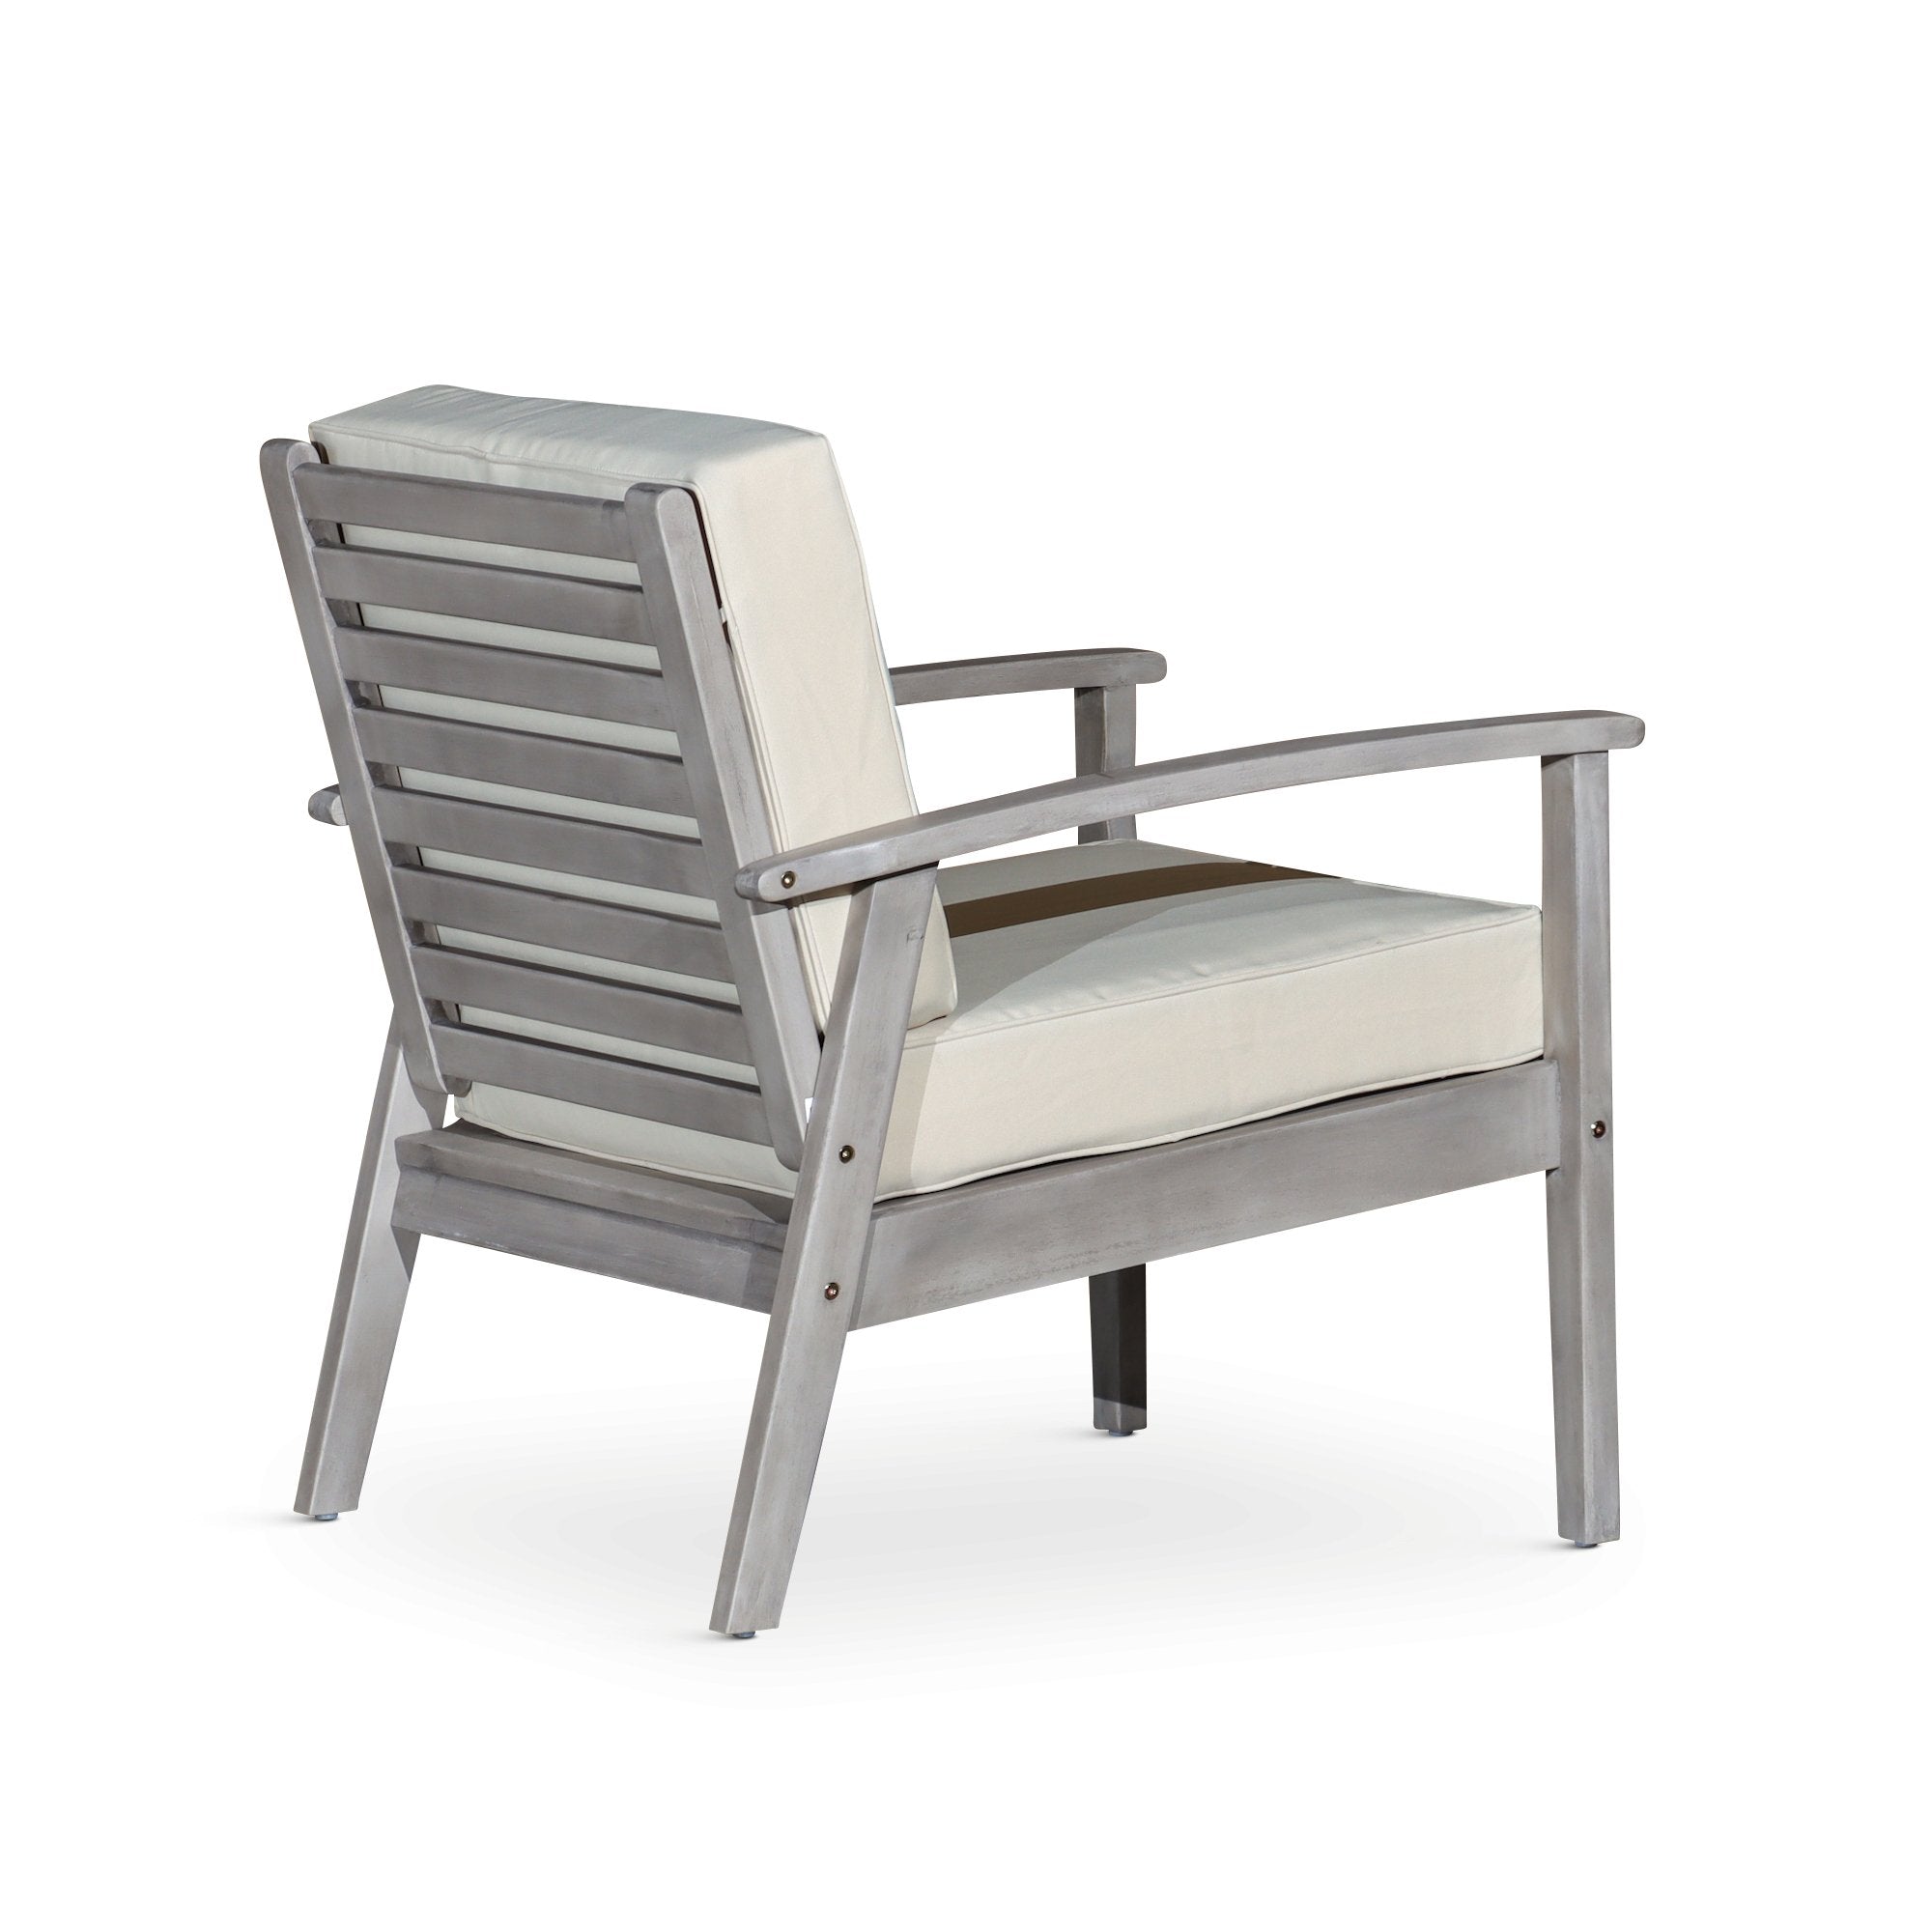 Deep Seat Outdoor Chair, Silver Gray Finish, Sand Cushions - Tuesday Morning-Chairs & Seating